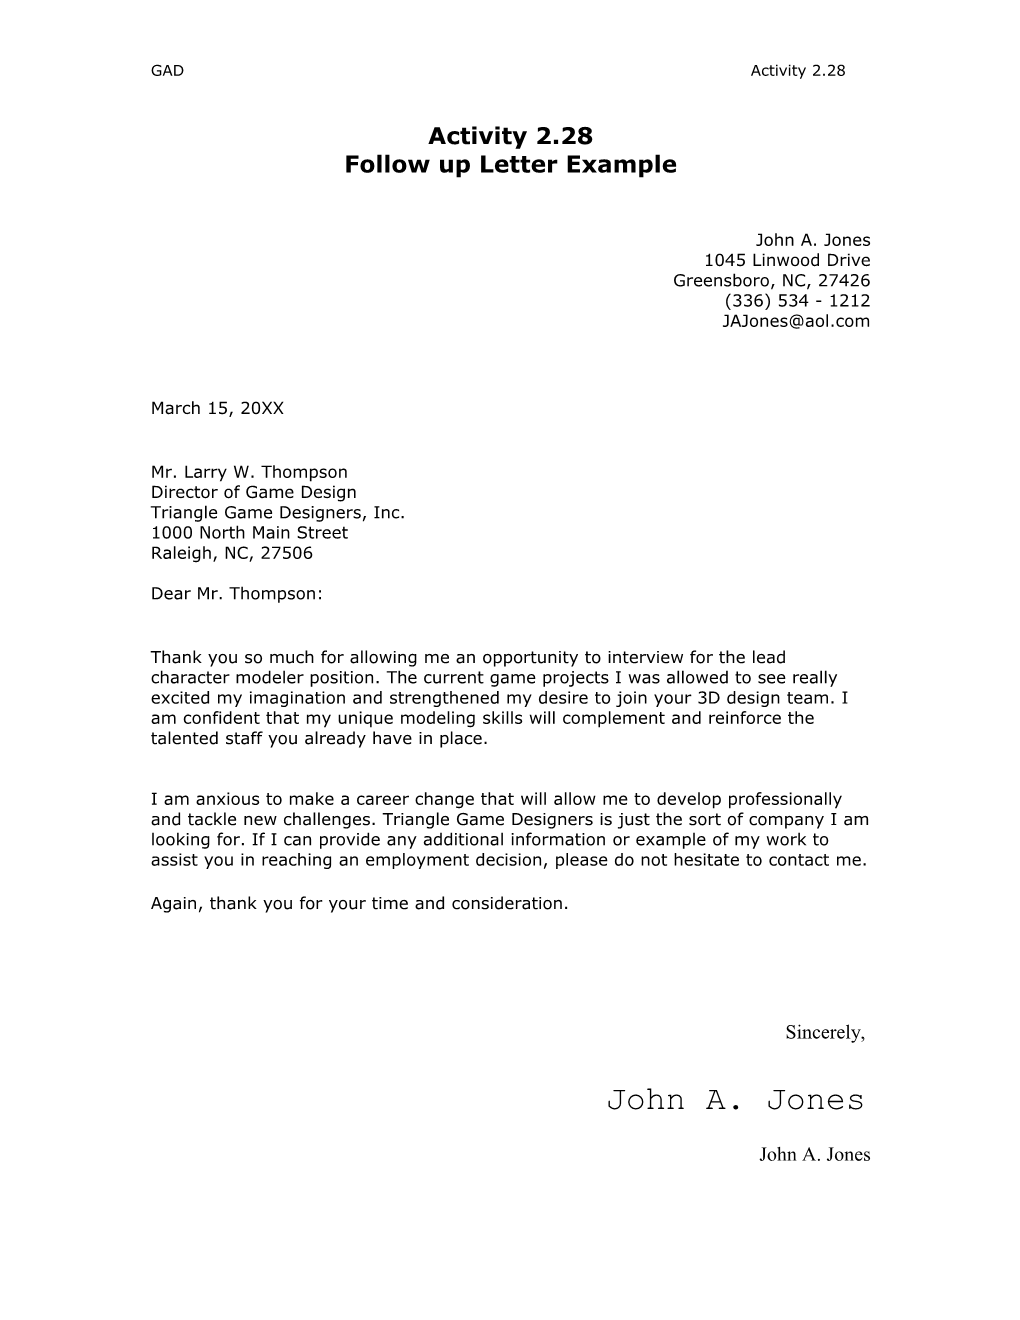 Follow up Letter Example